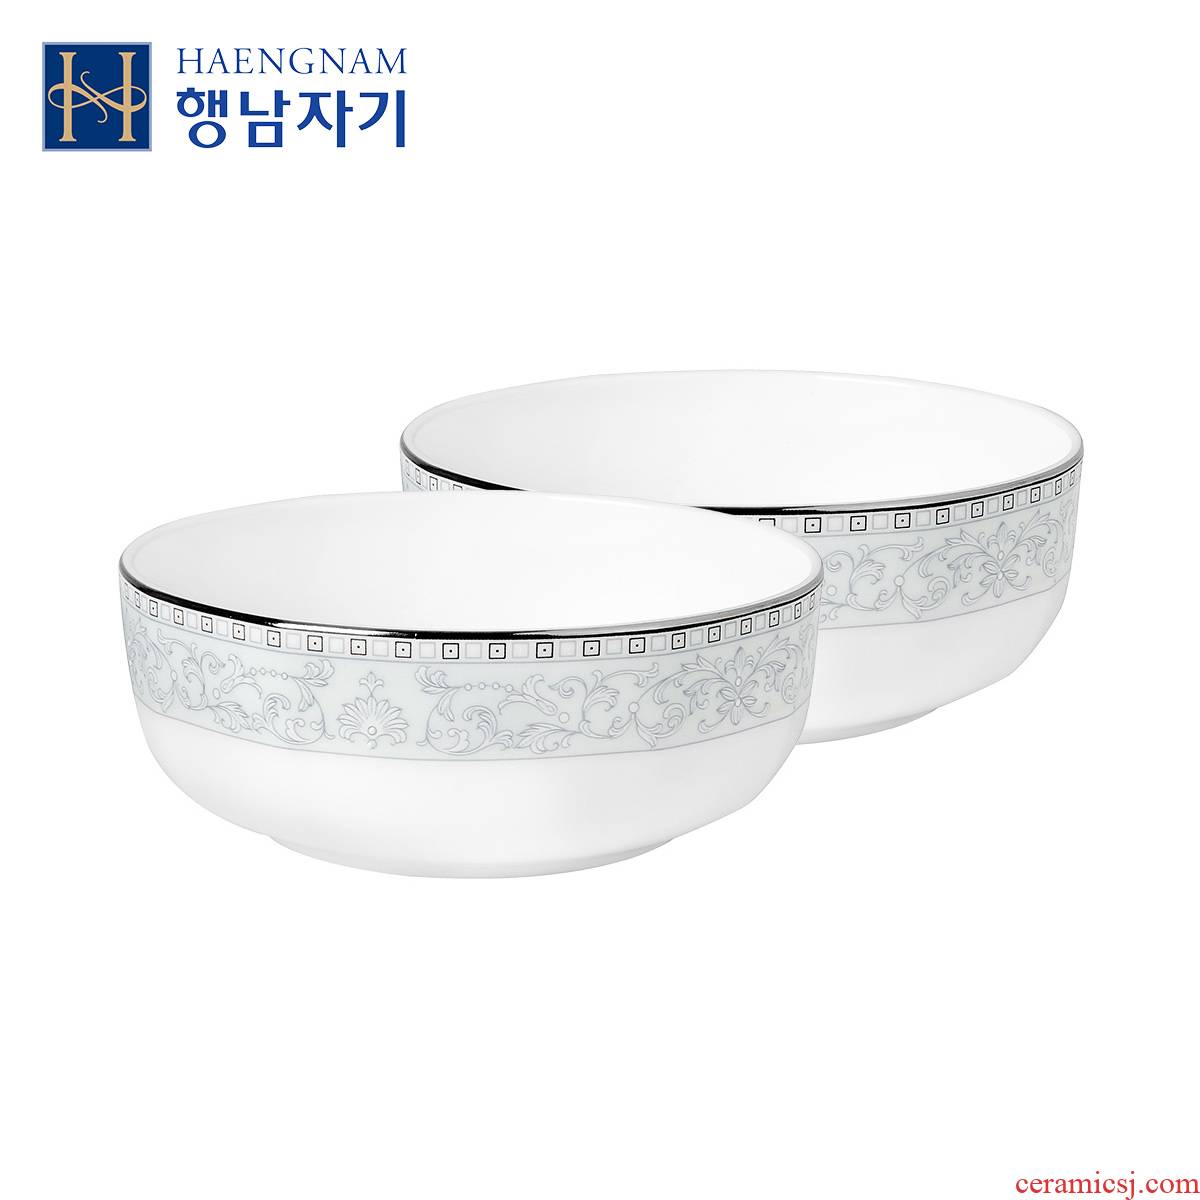 HAENGNAM Han Guoxing south China rural 5 "eight arrises soup bowl 2 only glair ipads porcelain tableware